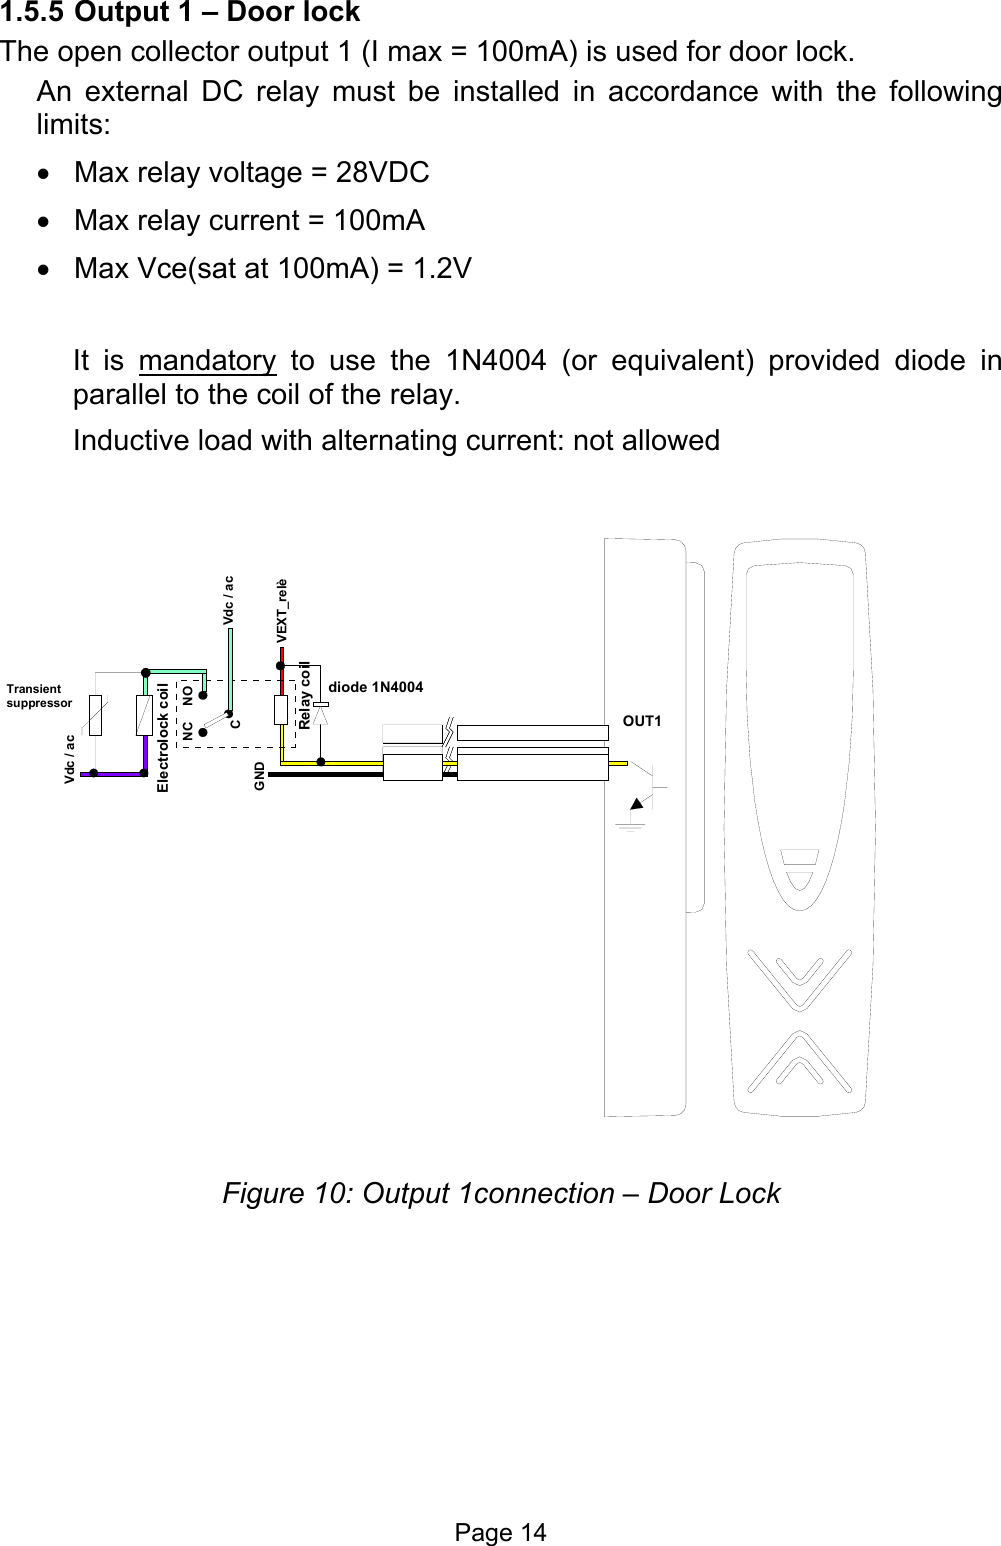  1.5.5 Output 1 – Door lock The open collector output 1 (I max = 100mA) is used for door lock.  An external DC relay must be installed in accordance with the following limits:  •  Max relay voltage = 28VDC •  Max relay current = 100mA •  Max Vce(sat at 100mA) = 1.2V  It is mandatory to use the 1N4004 (or equivalent) provided diode in parallel to the coil of the relay. Inductive load with alternating current: not allowed VEXT_relèGNDRelay coildiode 1N4004OUT1 Transient suppressorVdc / acVdc / acCNC NOElectrolock coil Figure 10: Output 1connection – Door Lock     Page 14 